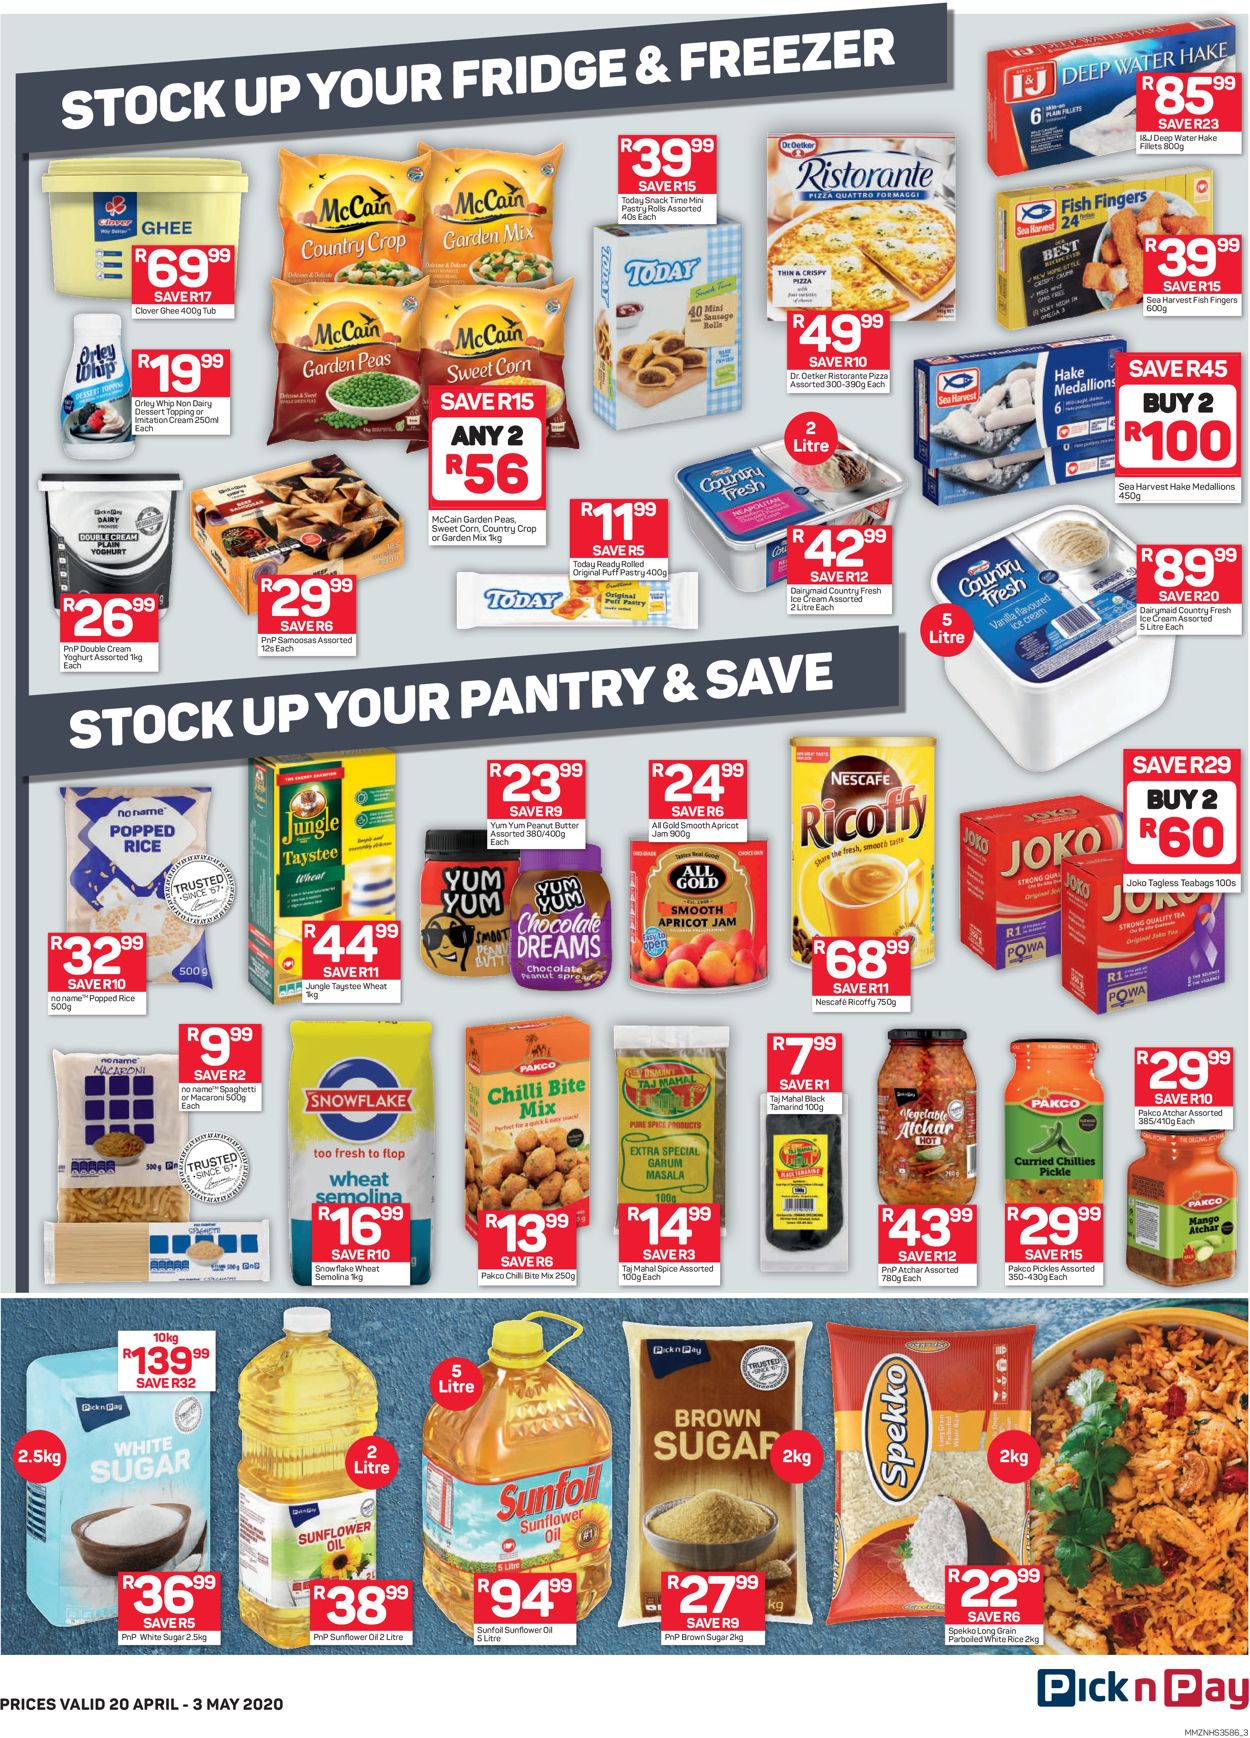 Pick n Pay Catalogue - 2020/04/20-2020/05/03 (Page 3)